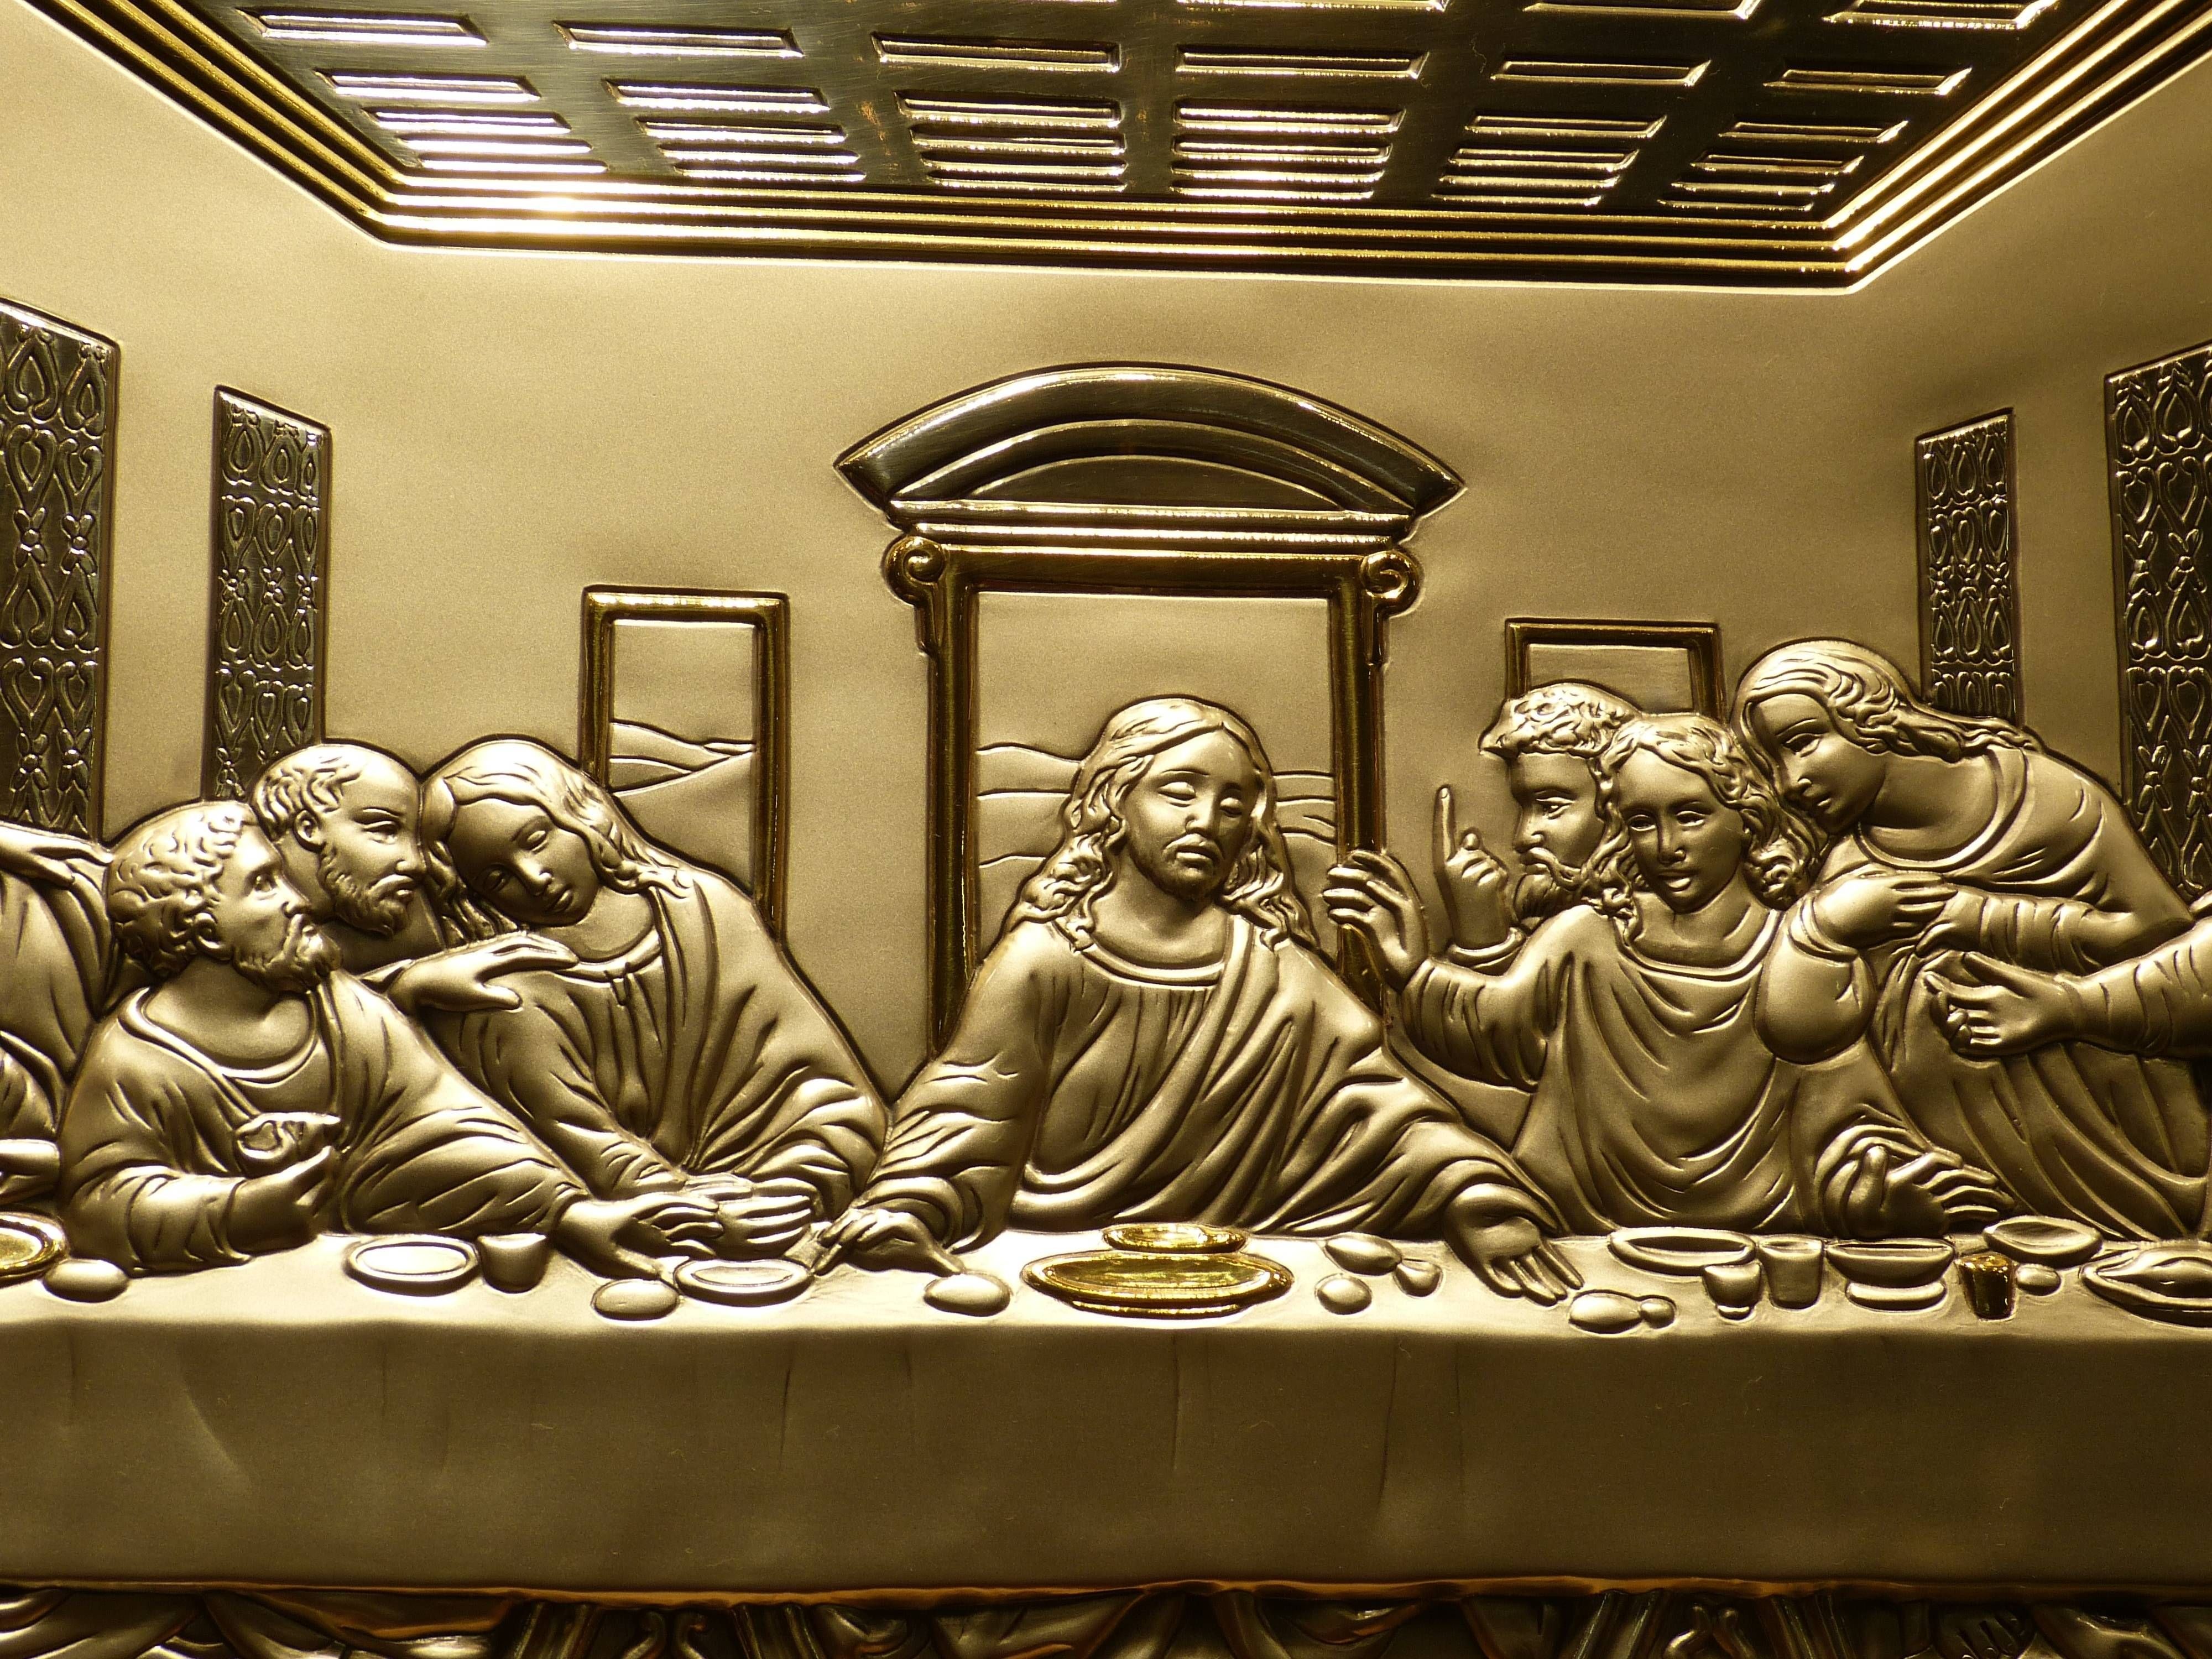 The Last Supper Gold Wall Art Free Image | Peakpx For Newest The Last Supper Wall Art (View 13 of 20)